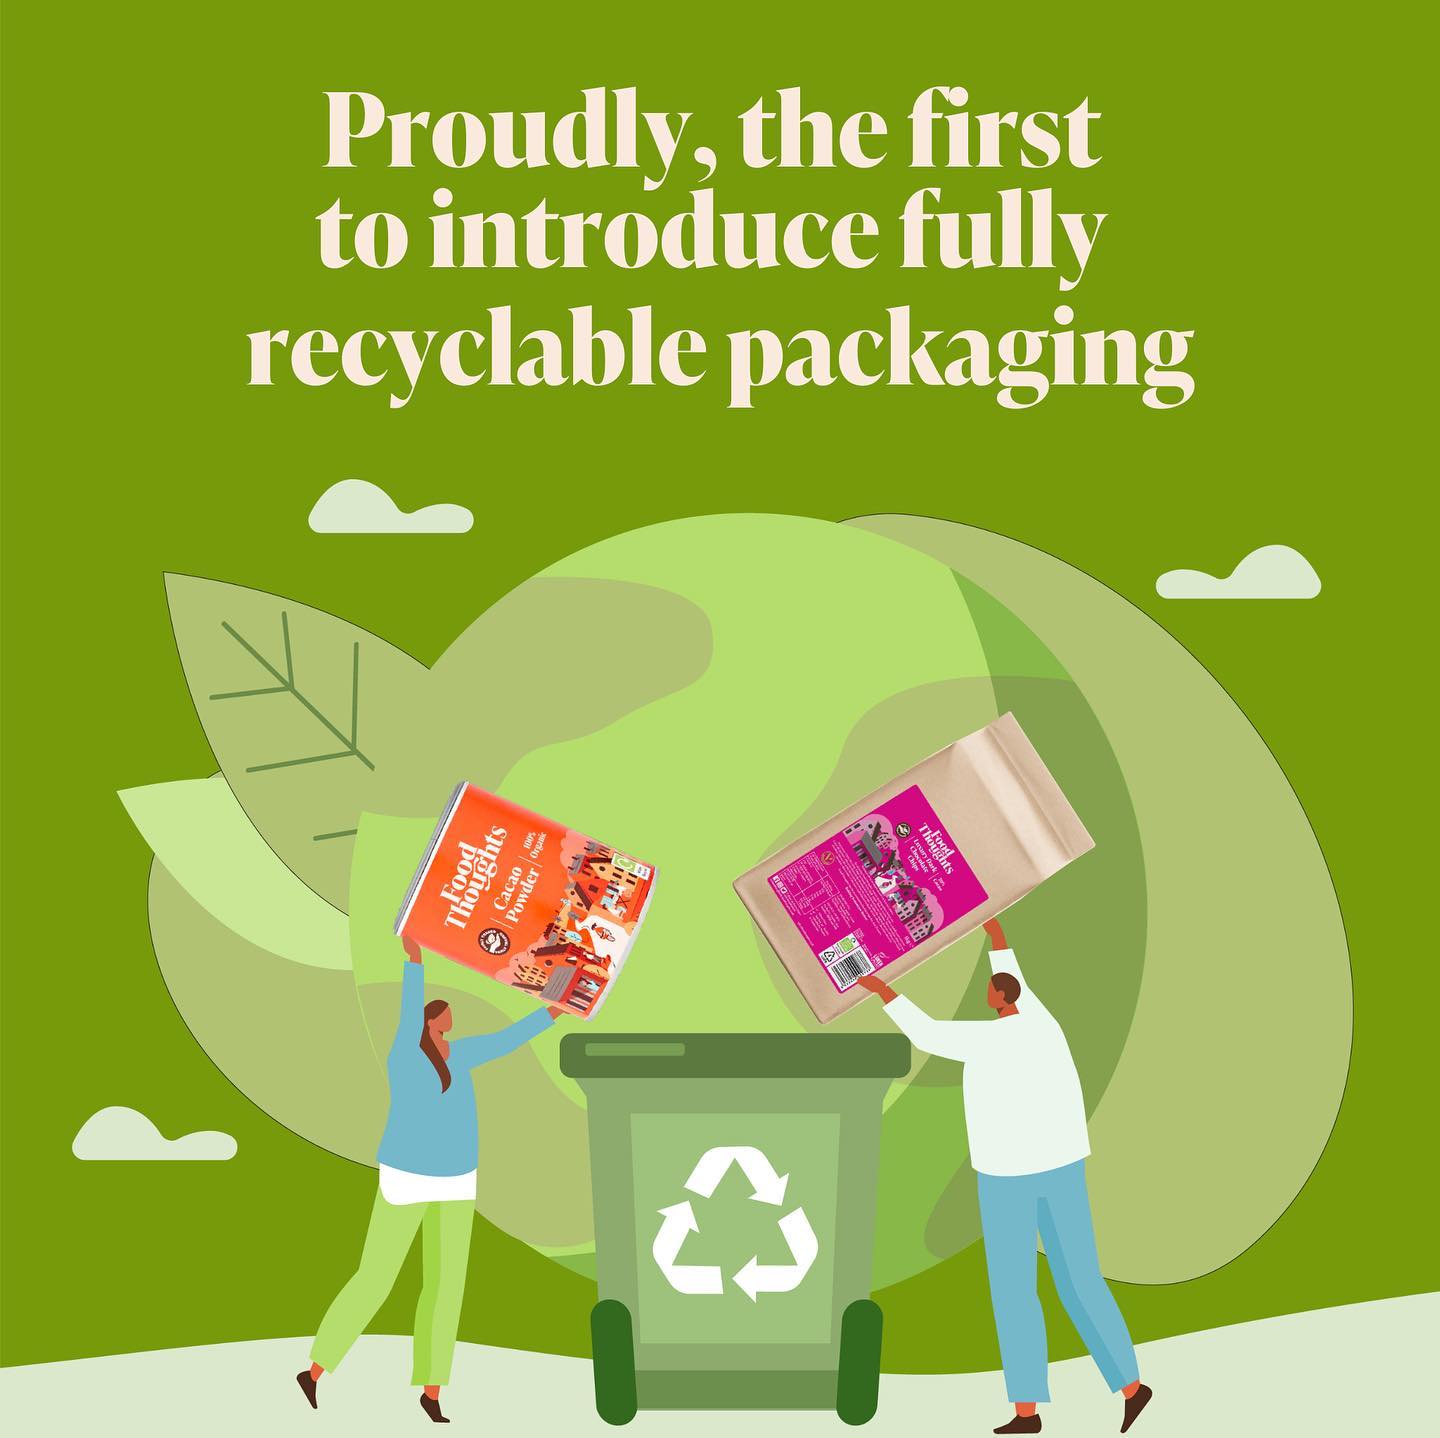 Happy #WorldEnvironmentDay! We take sustainability seriously here at
@foodthoughtsuk and are proud to be the first cocoa brand to offer
fully recyclable packaging in the UK– just one of the small steps
we’re taking toward making our planet a better place 🌎 

Together we can drive positive change, one cup of cocoa at a time!